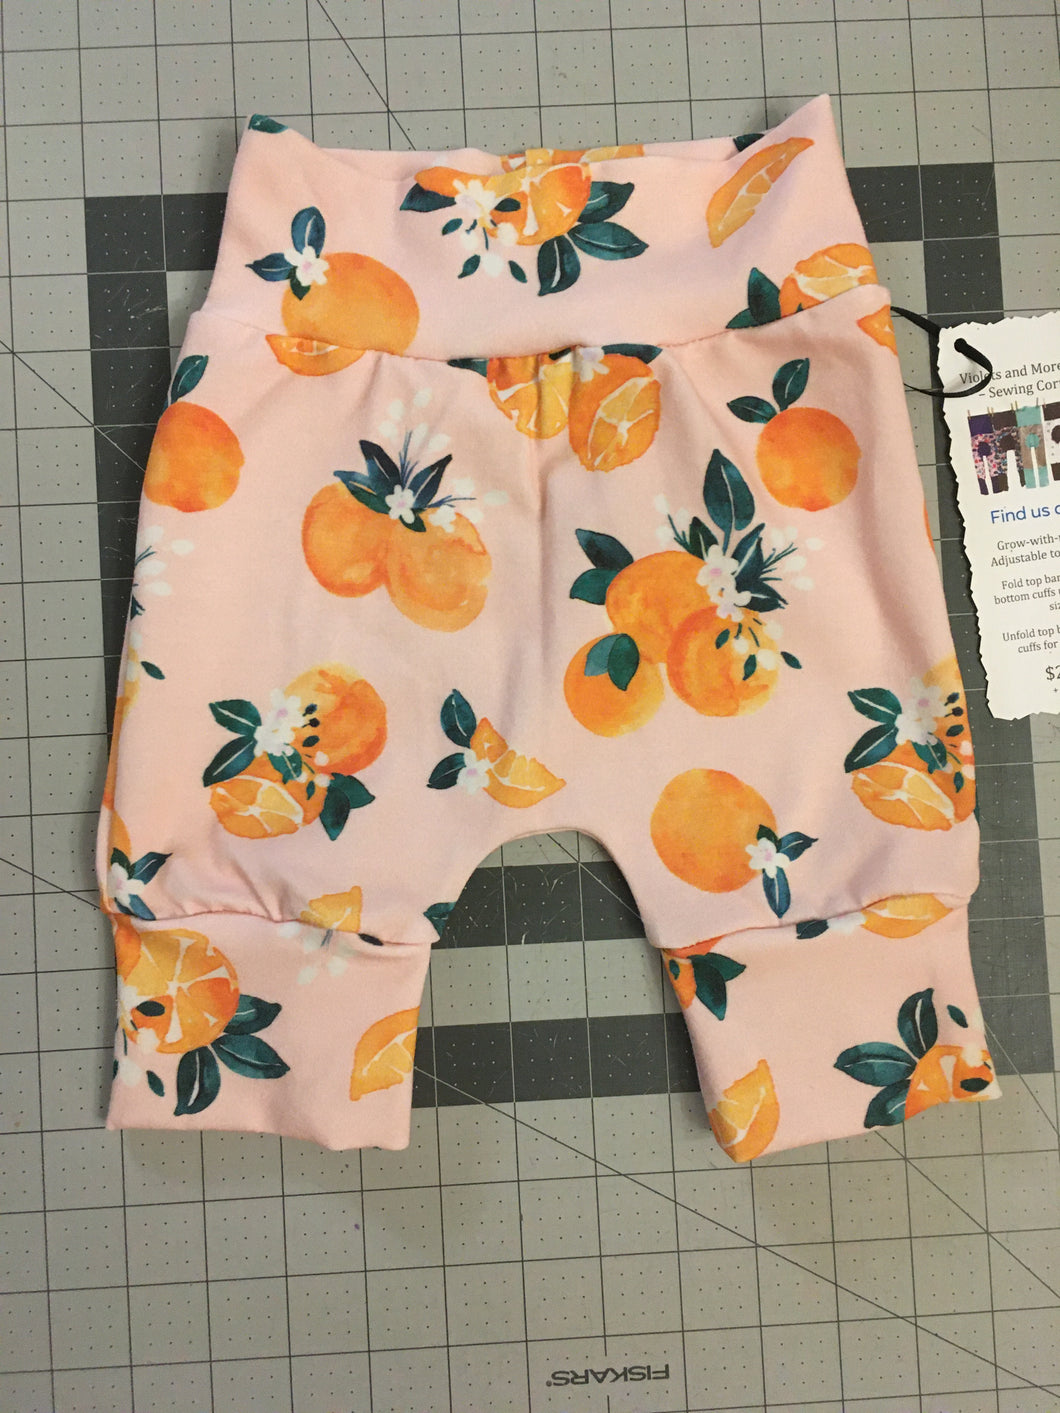 9mo-3T Oranges with Flowers Maxaloones Shorts